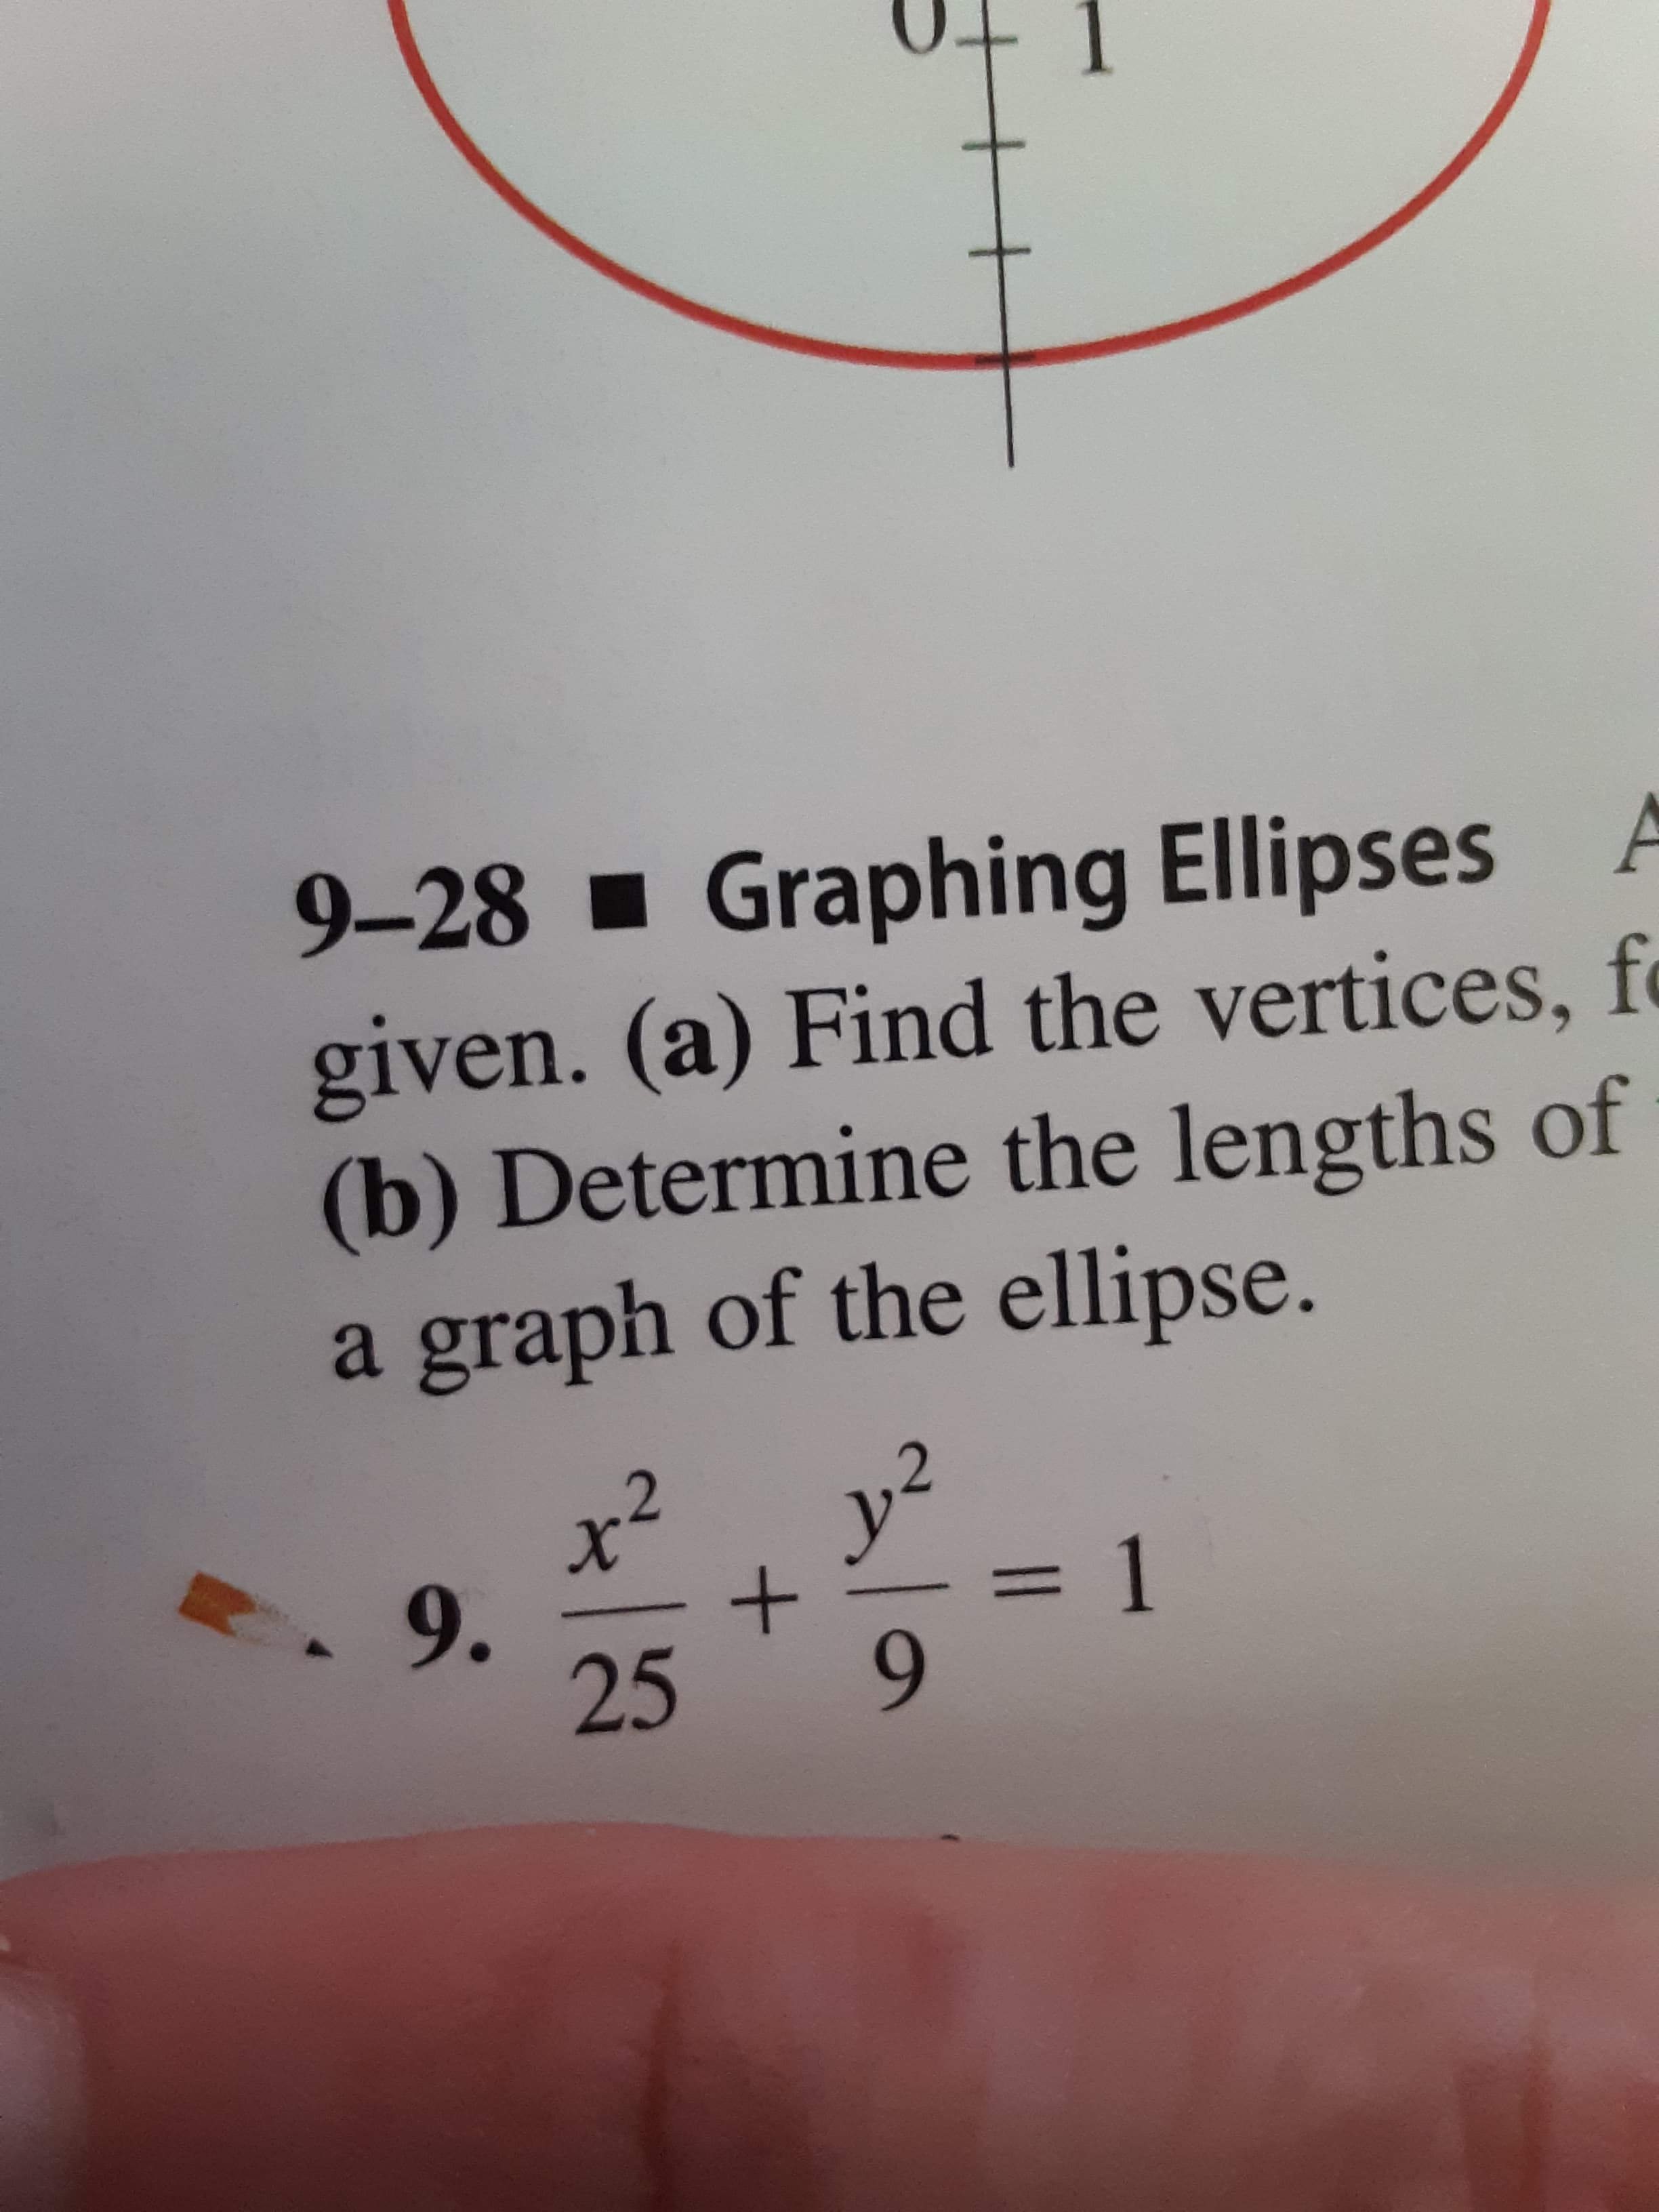 9-28 Graphing Ellipses A
given. (a) Find the vertices, f
(b) Determine the lengths of
a graph of the ellipse.
1
9.
+
9
25
40
11
